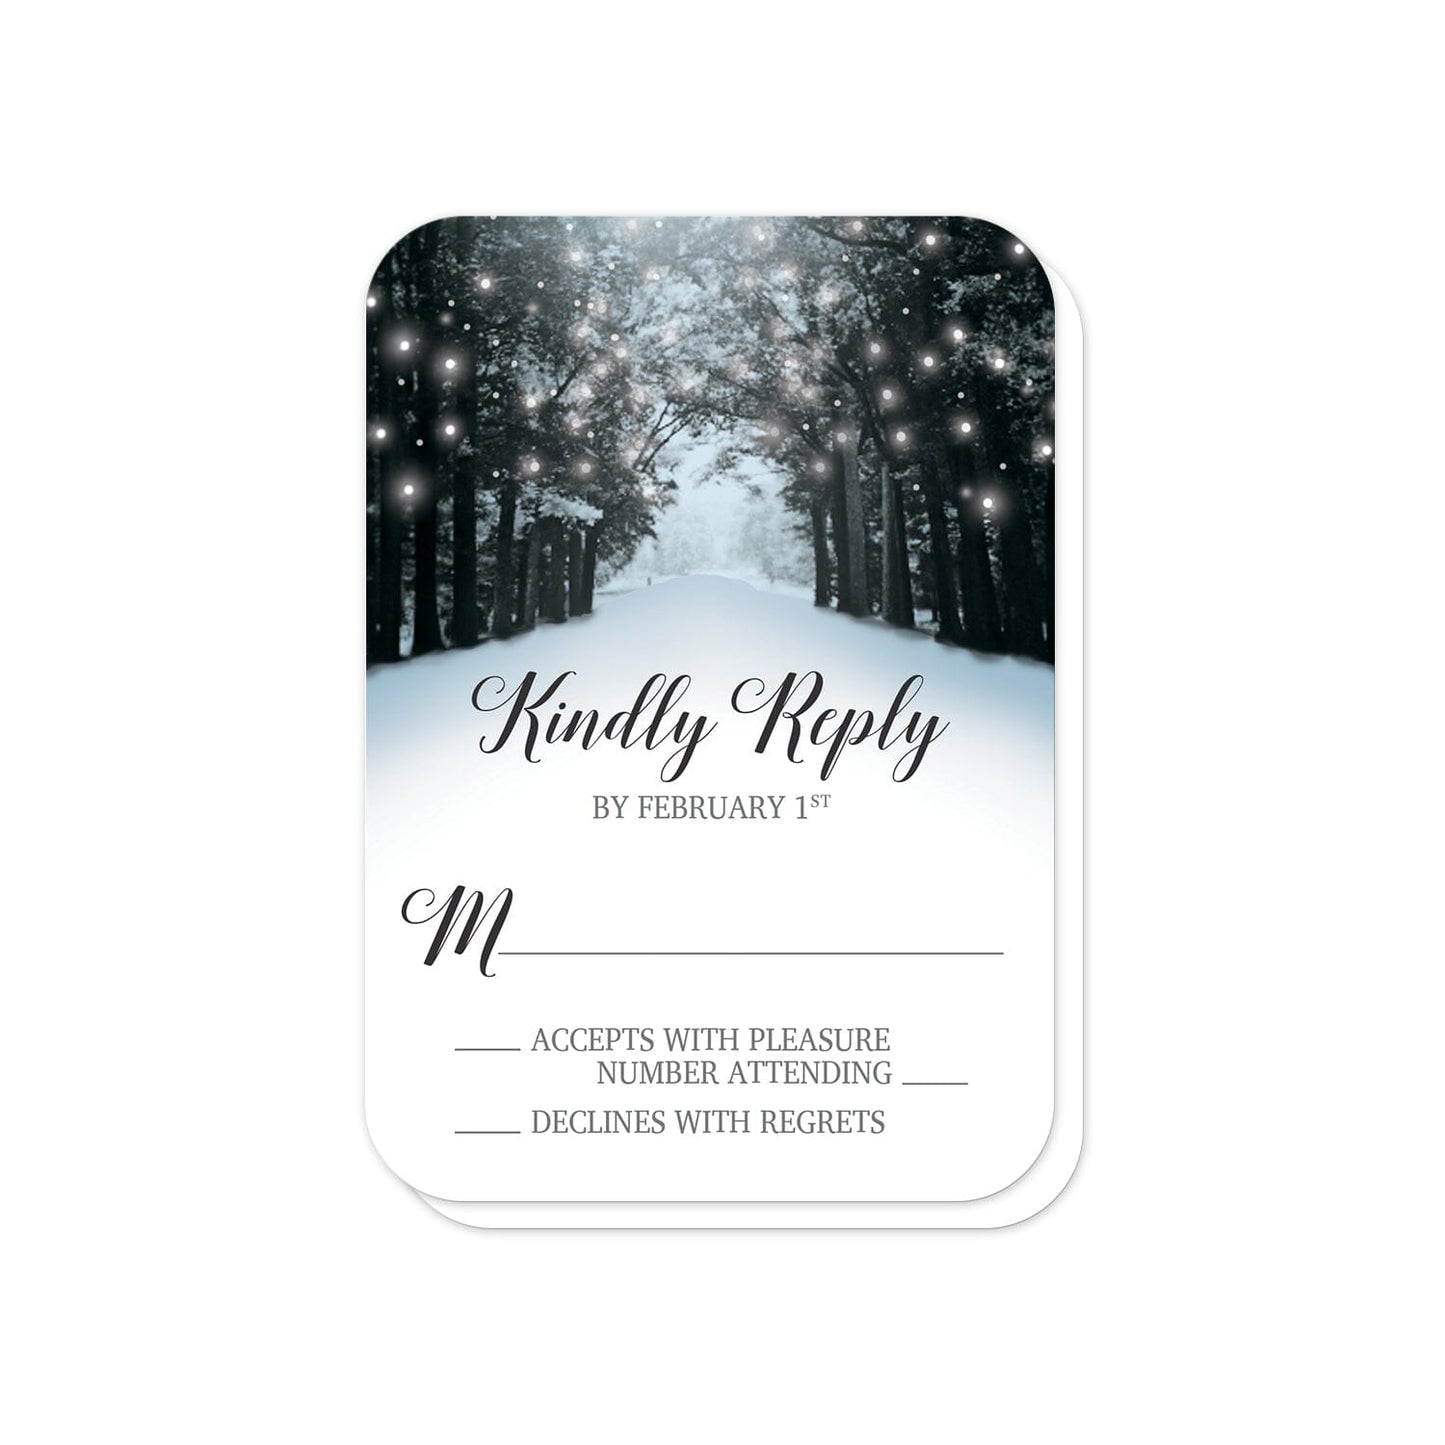 Snowy Winter Road Tree Lights RSVP Cards (with rounded corners) at Artistically Invited.